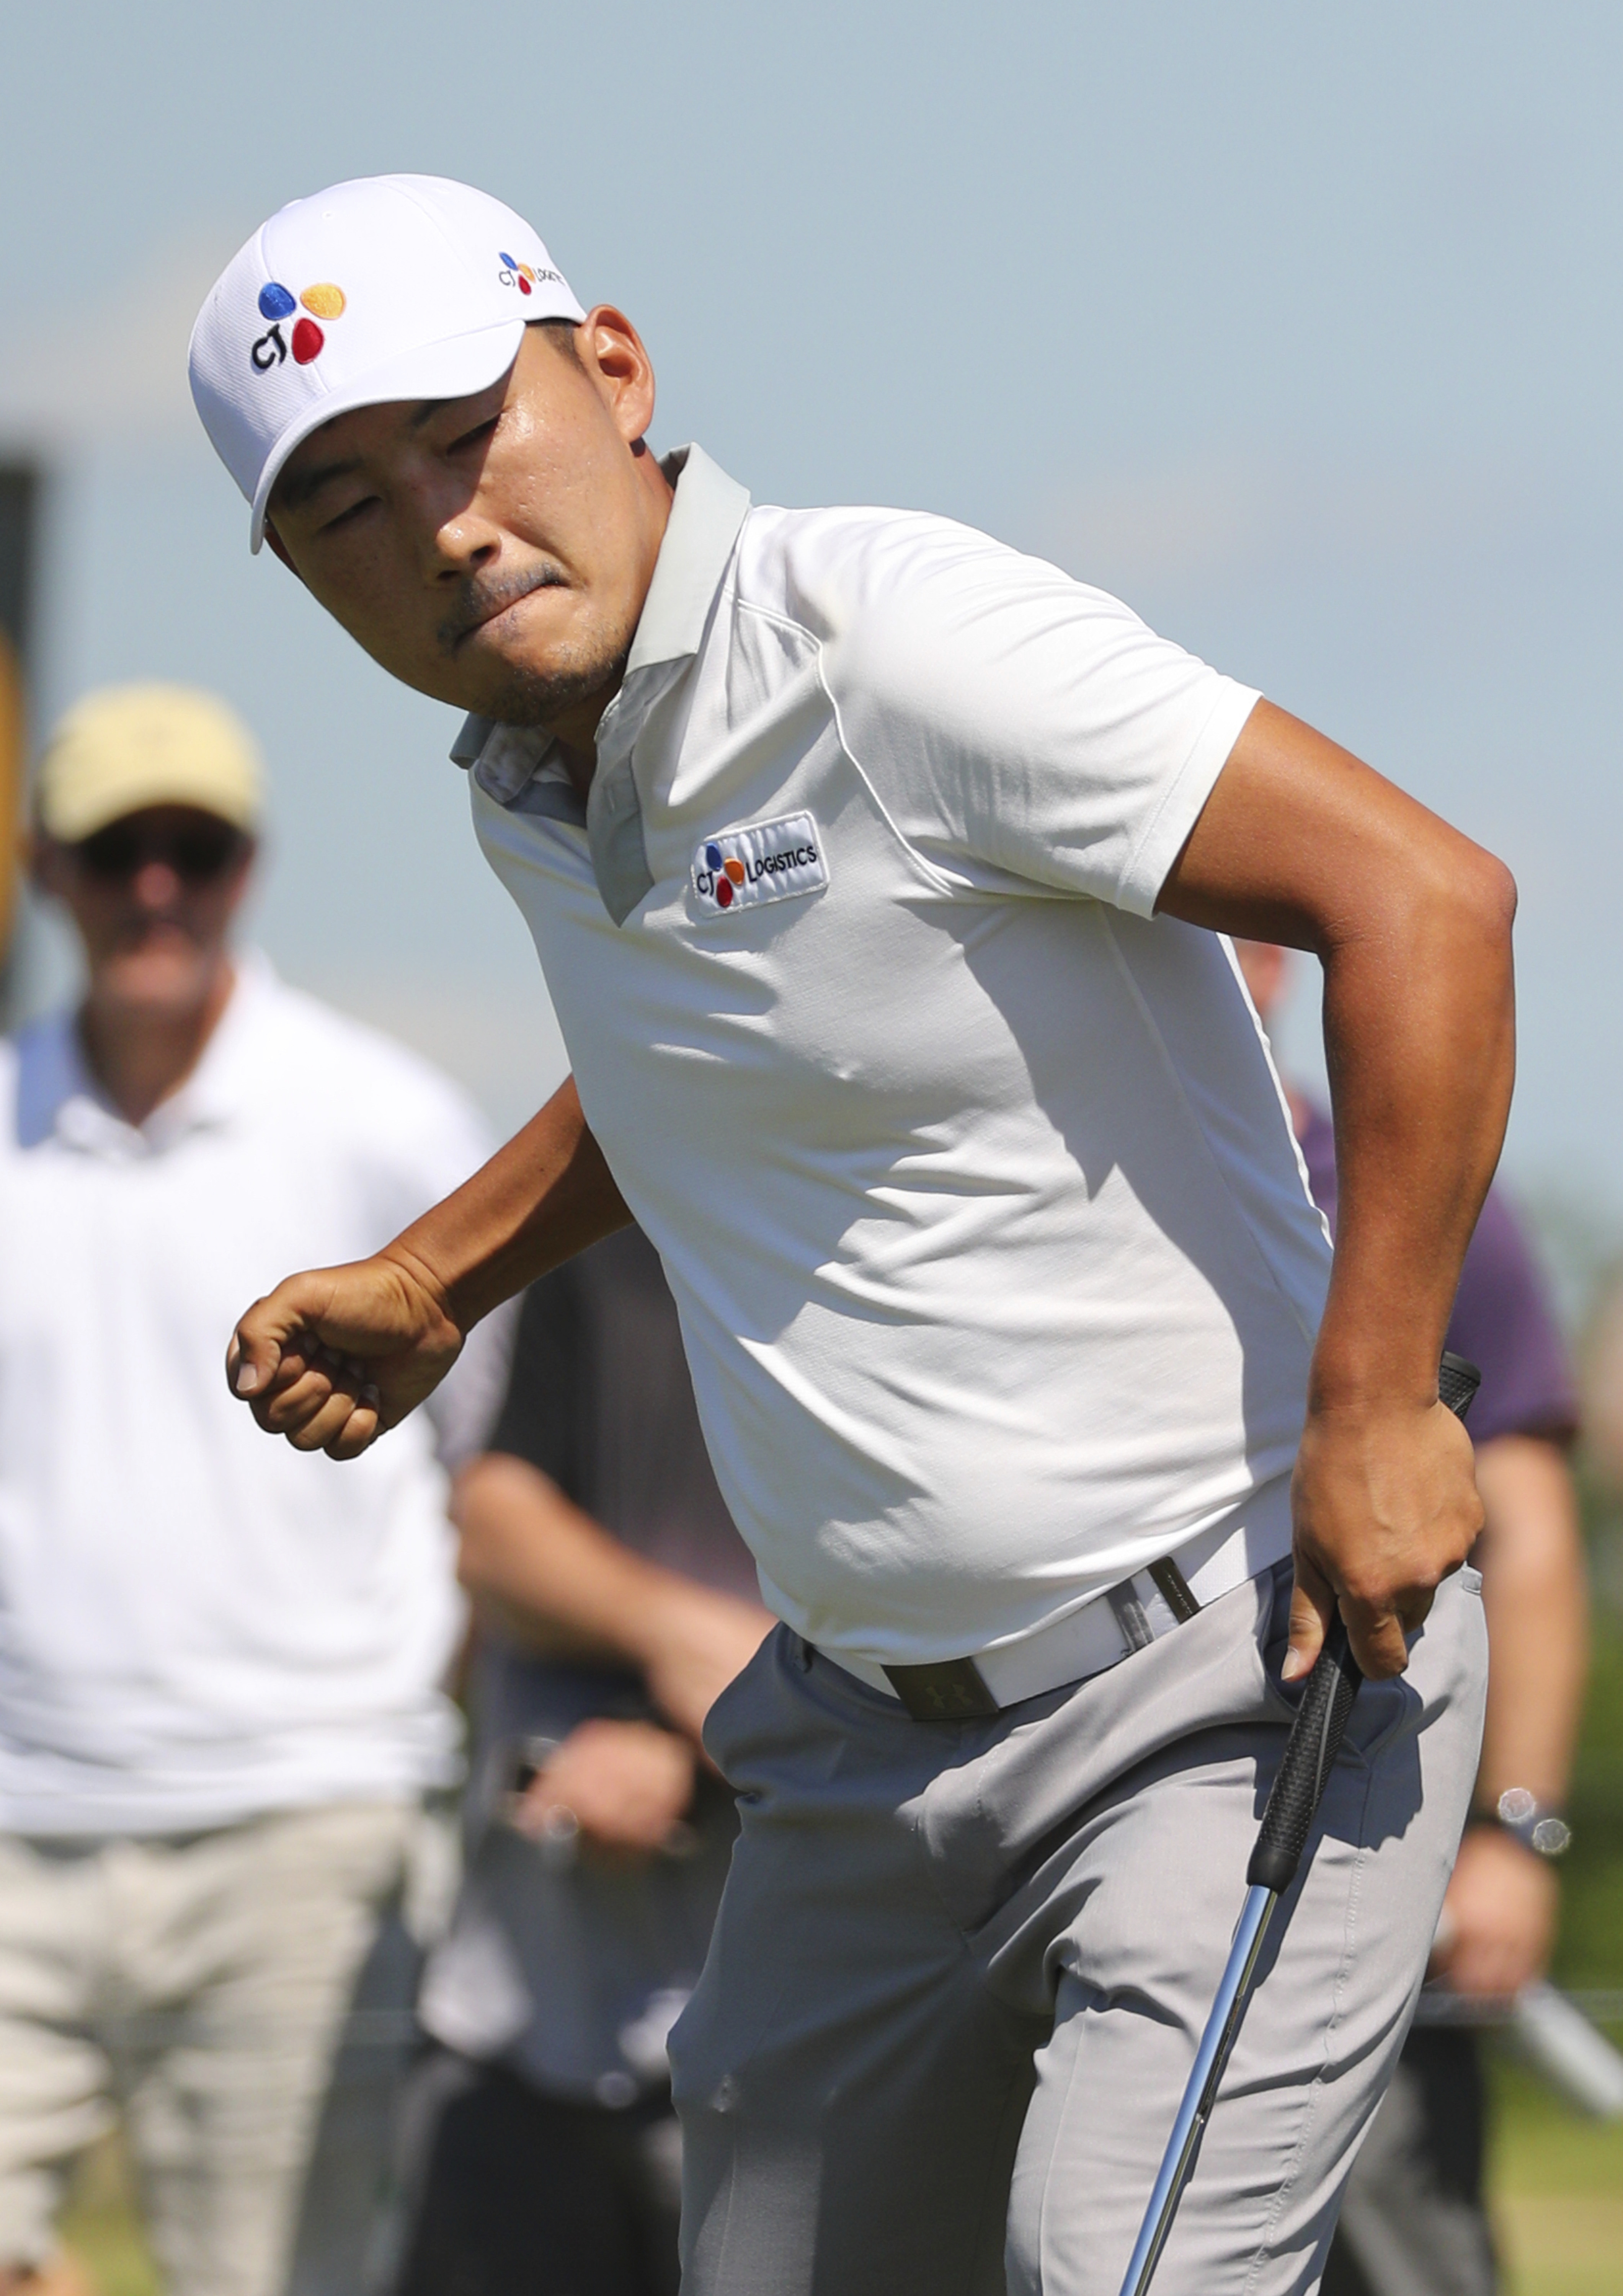 Kang regains lead in 3rd round resumption at Byron Nelson